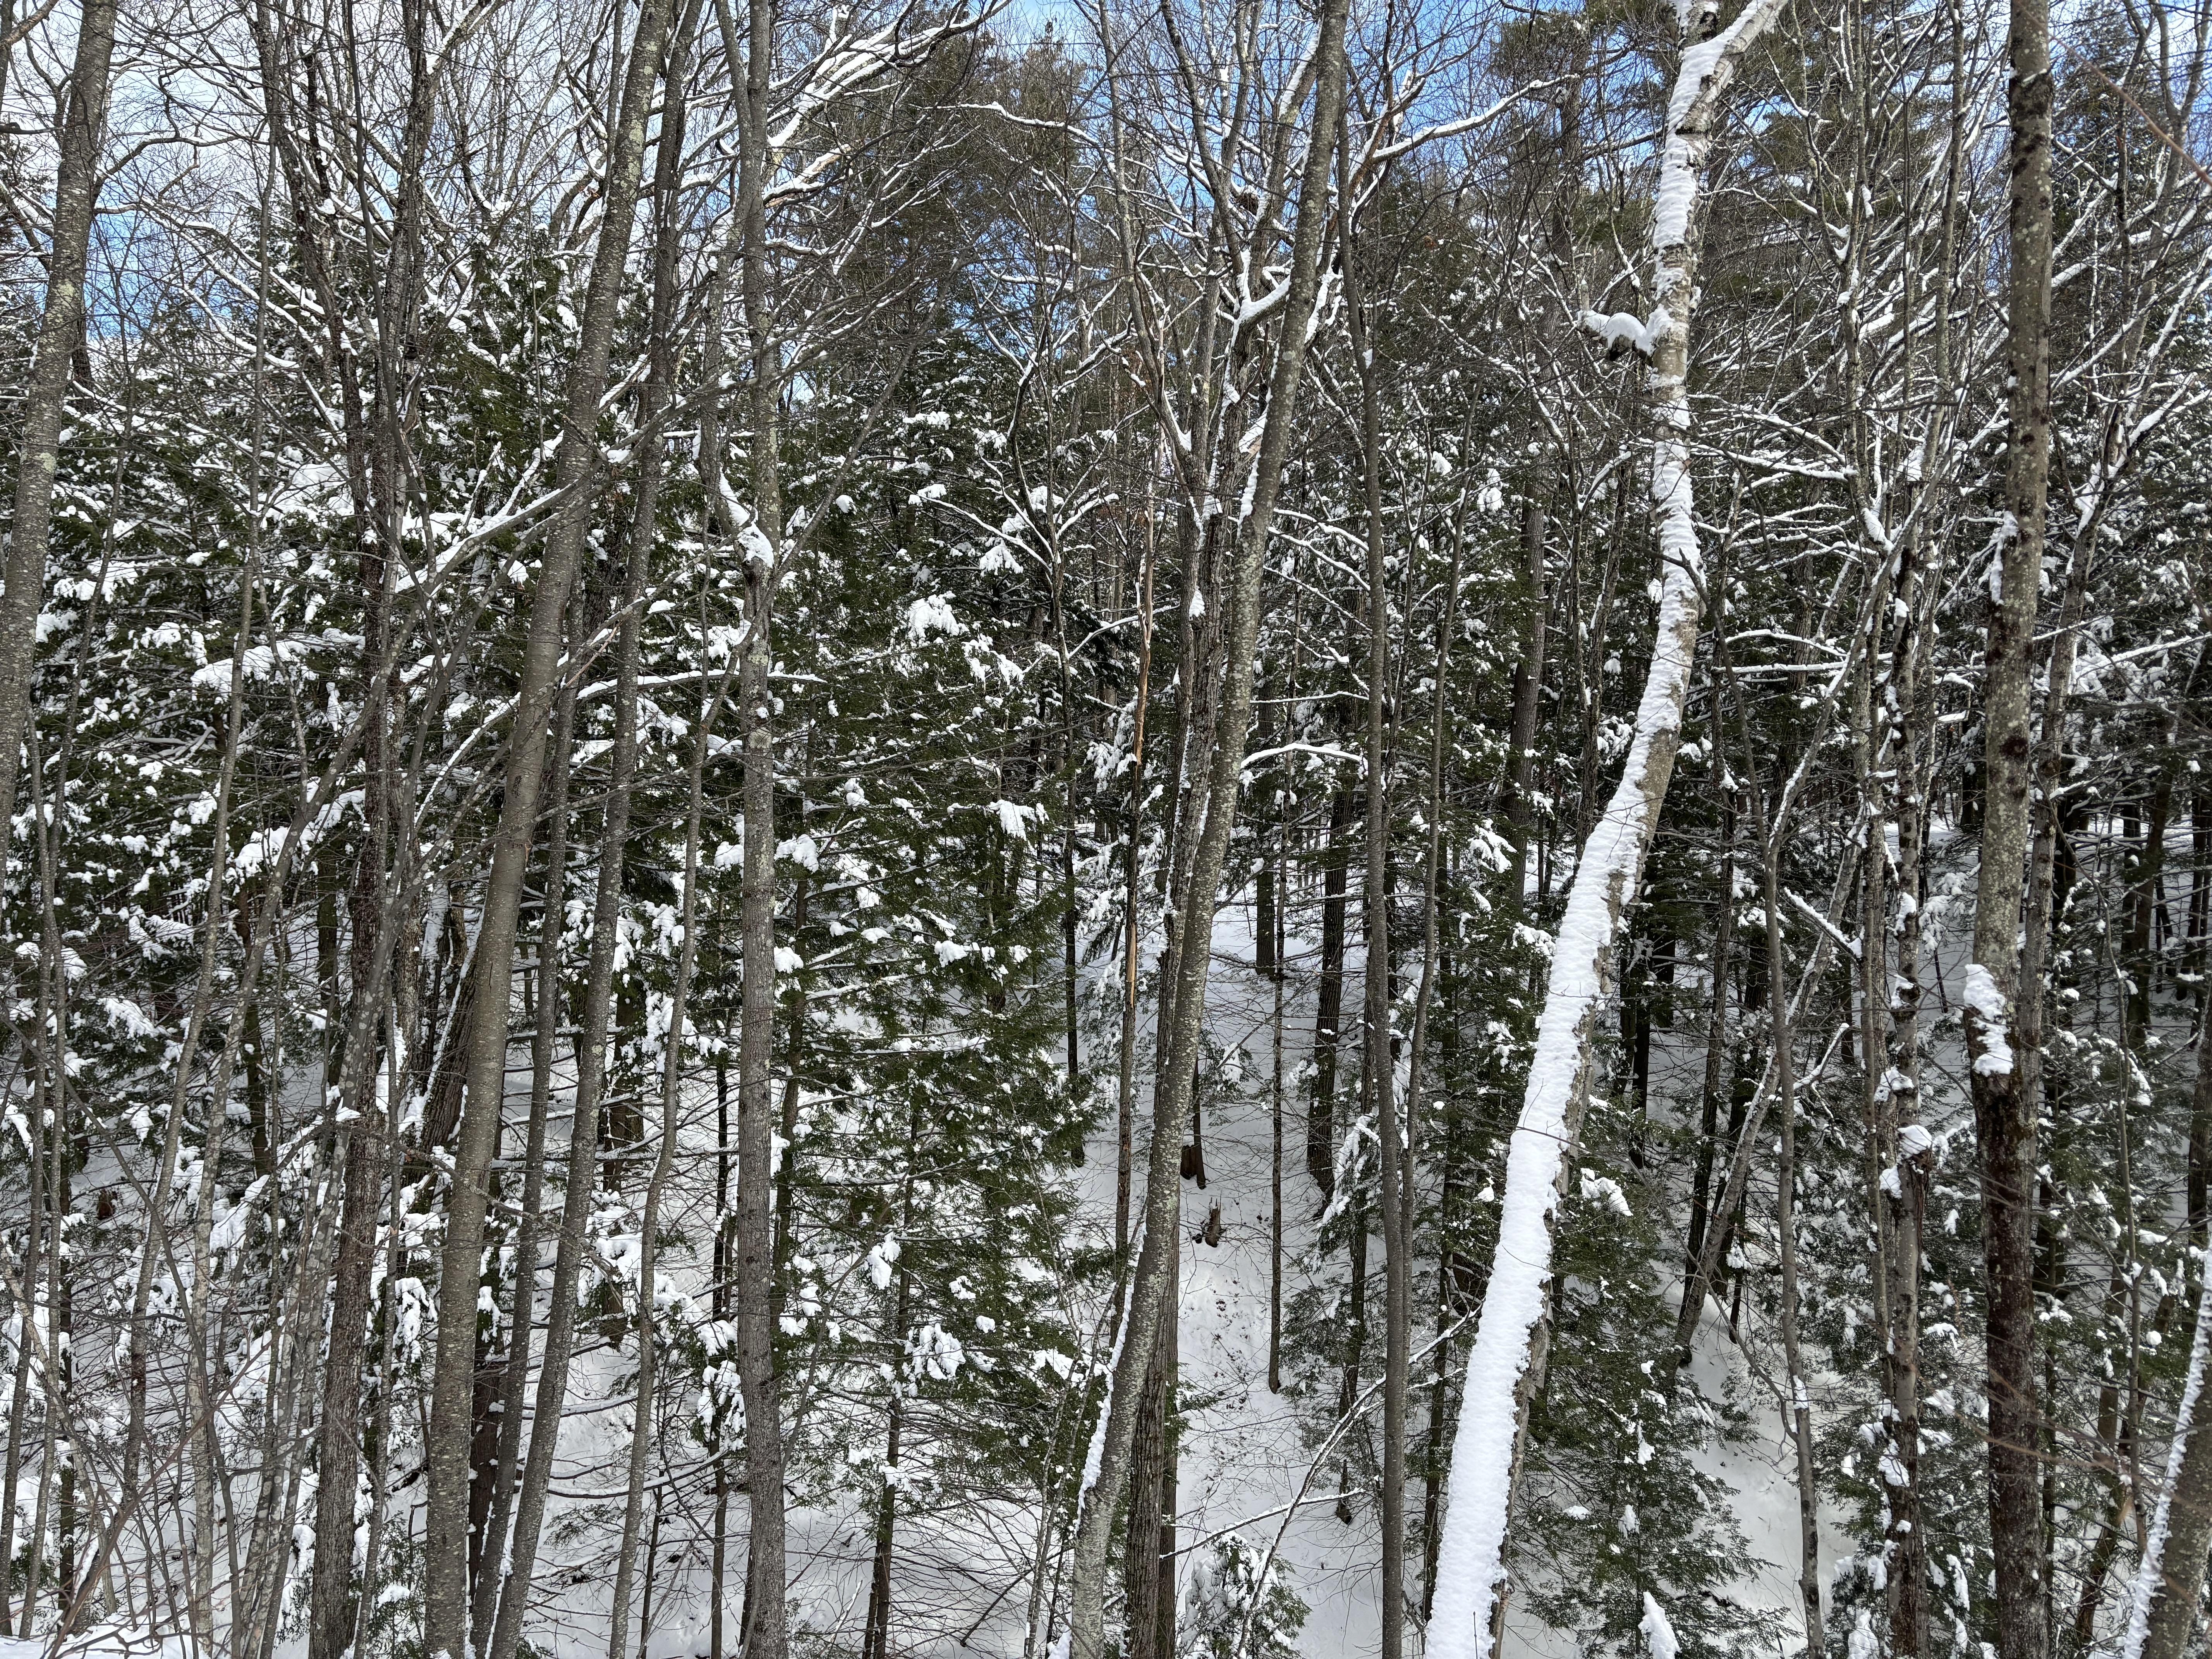 The forest outside the Conservation Center in winter.